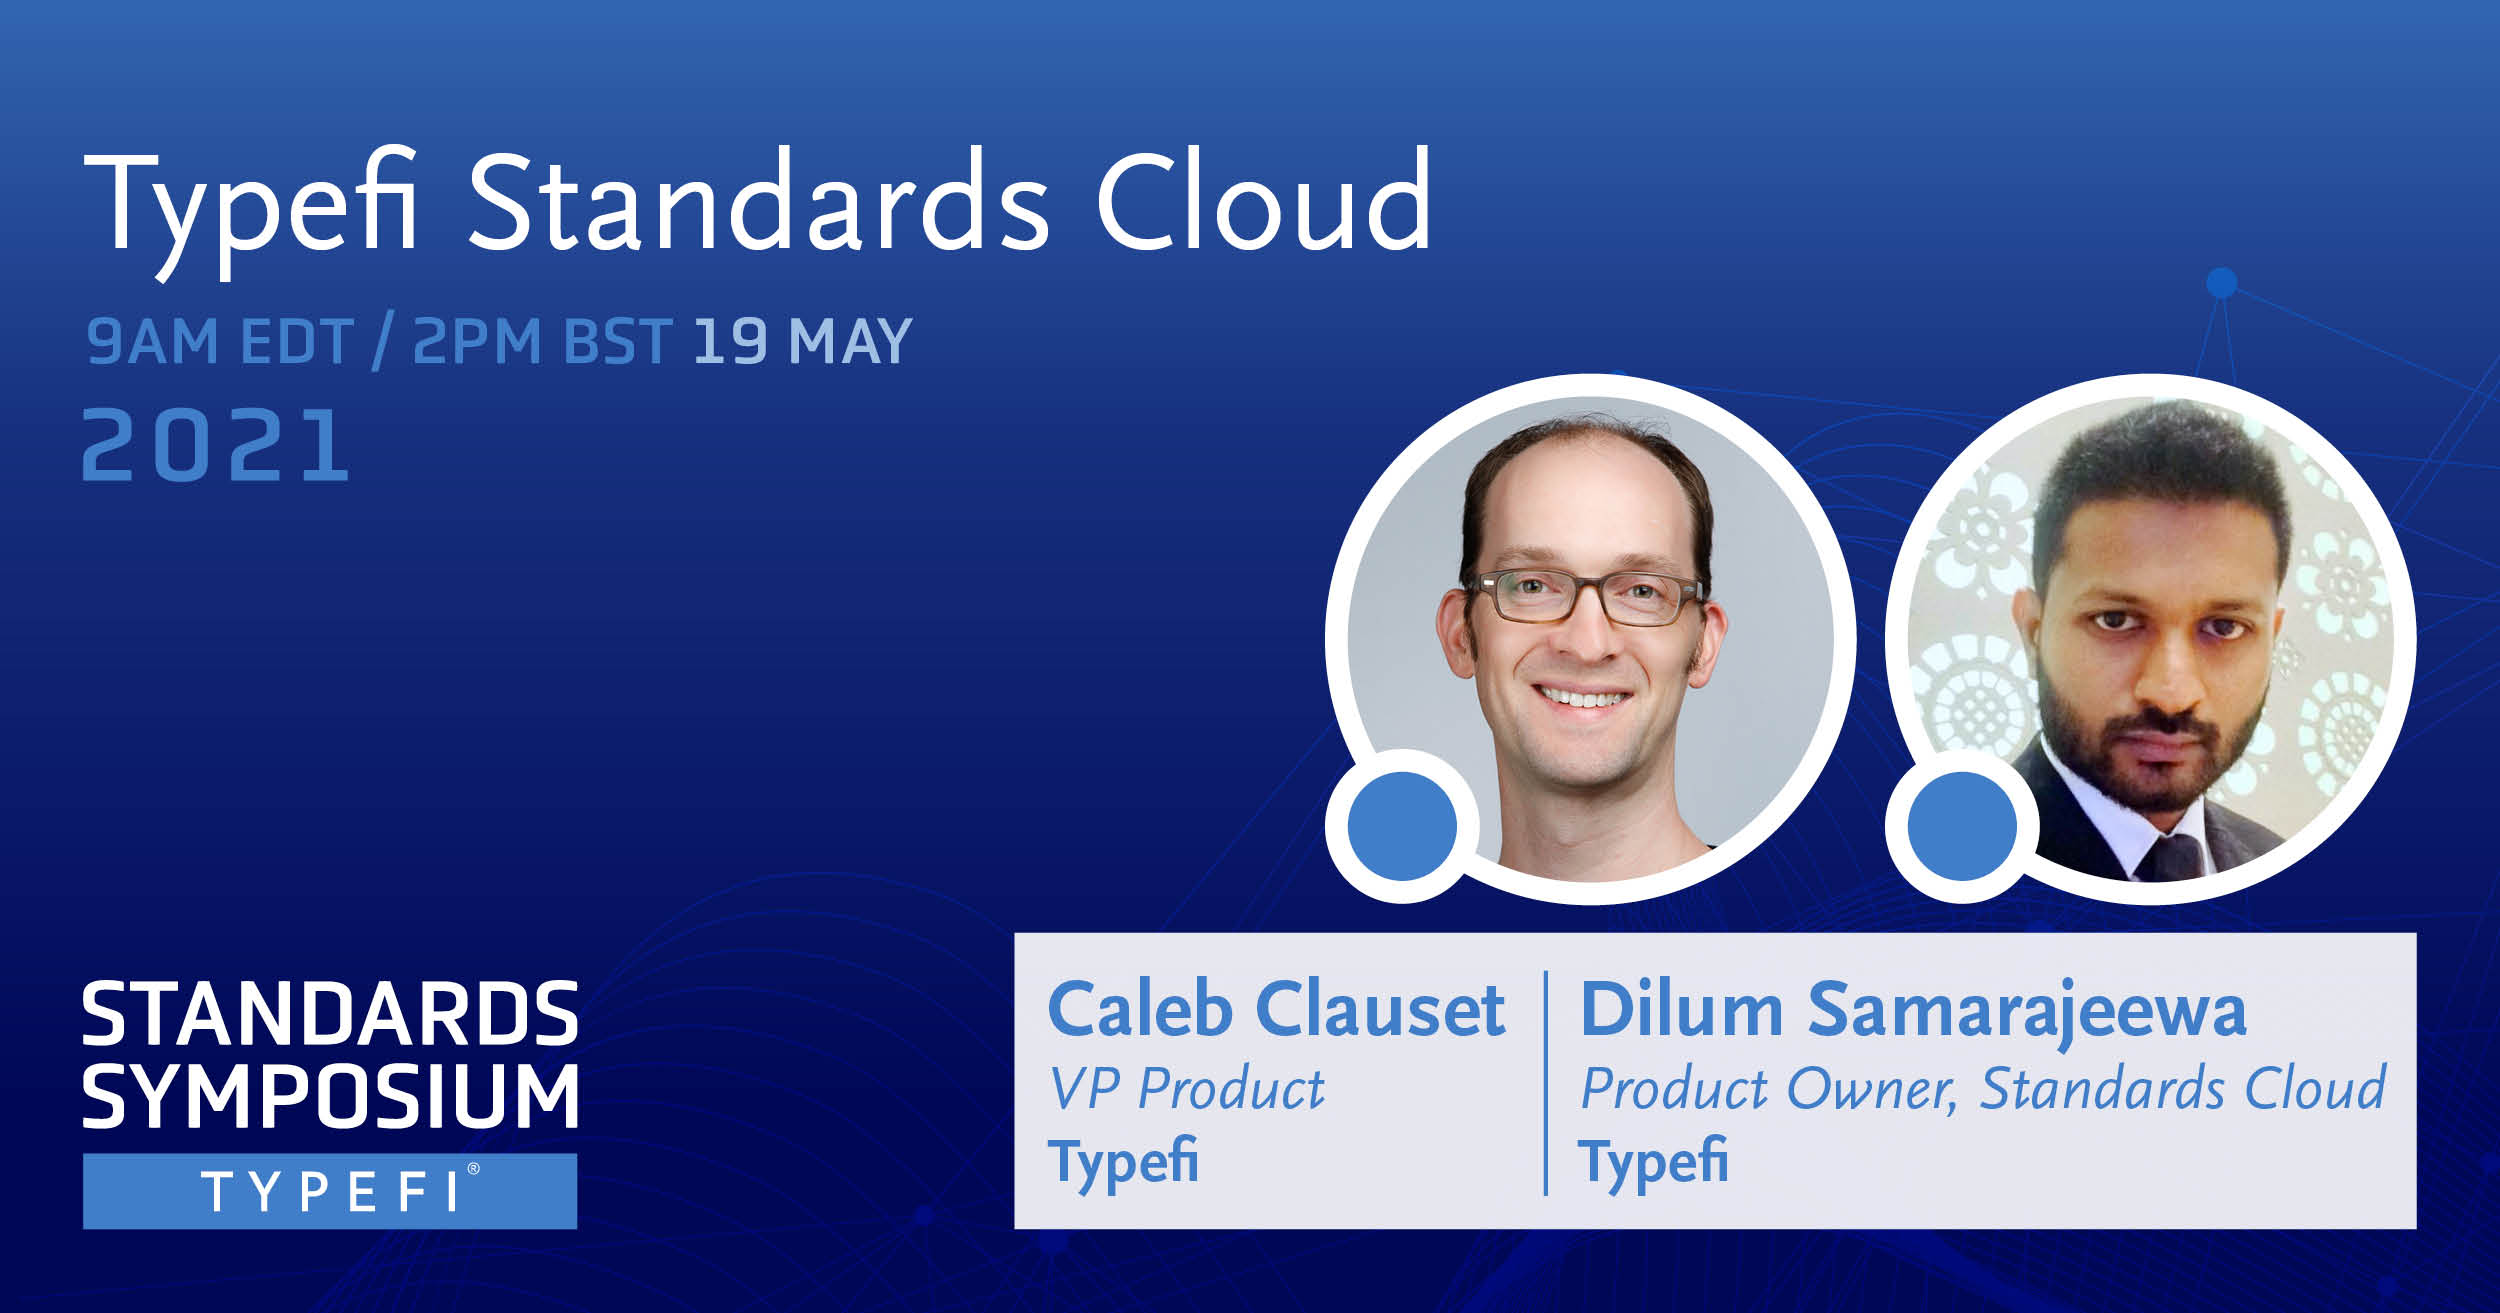 Banner advertising Typefi Standards Cloud, a demo presented by Caleb Clauset and Dilum Samarajeewa at the 2021 Typefi Standards Symposium.